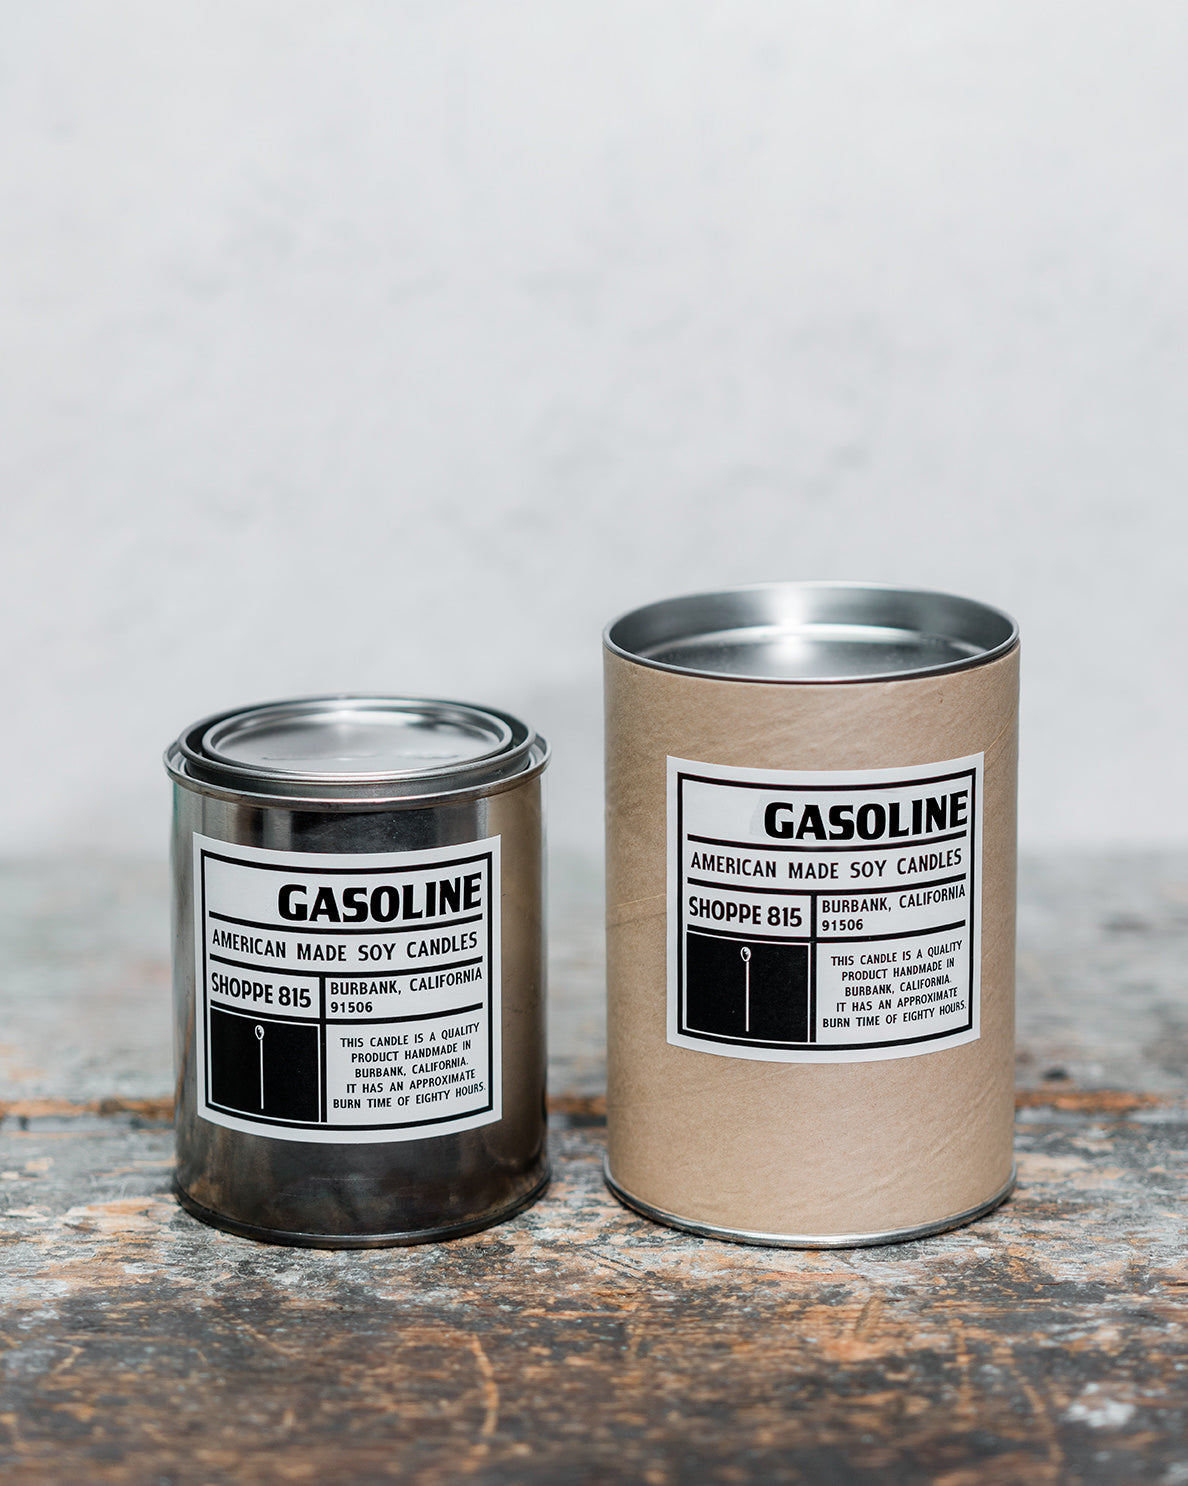 Gasoline tin candle on wooden shelf with packaging